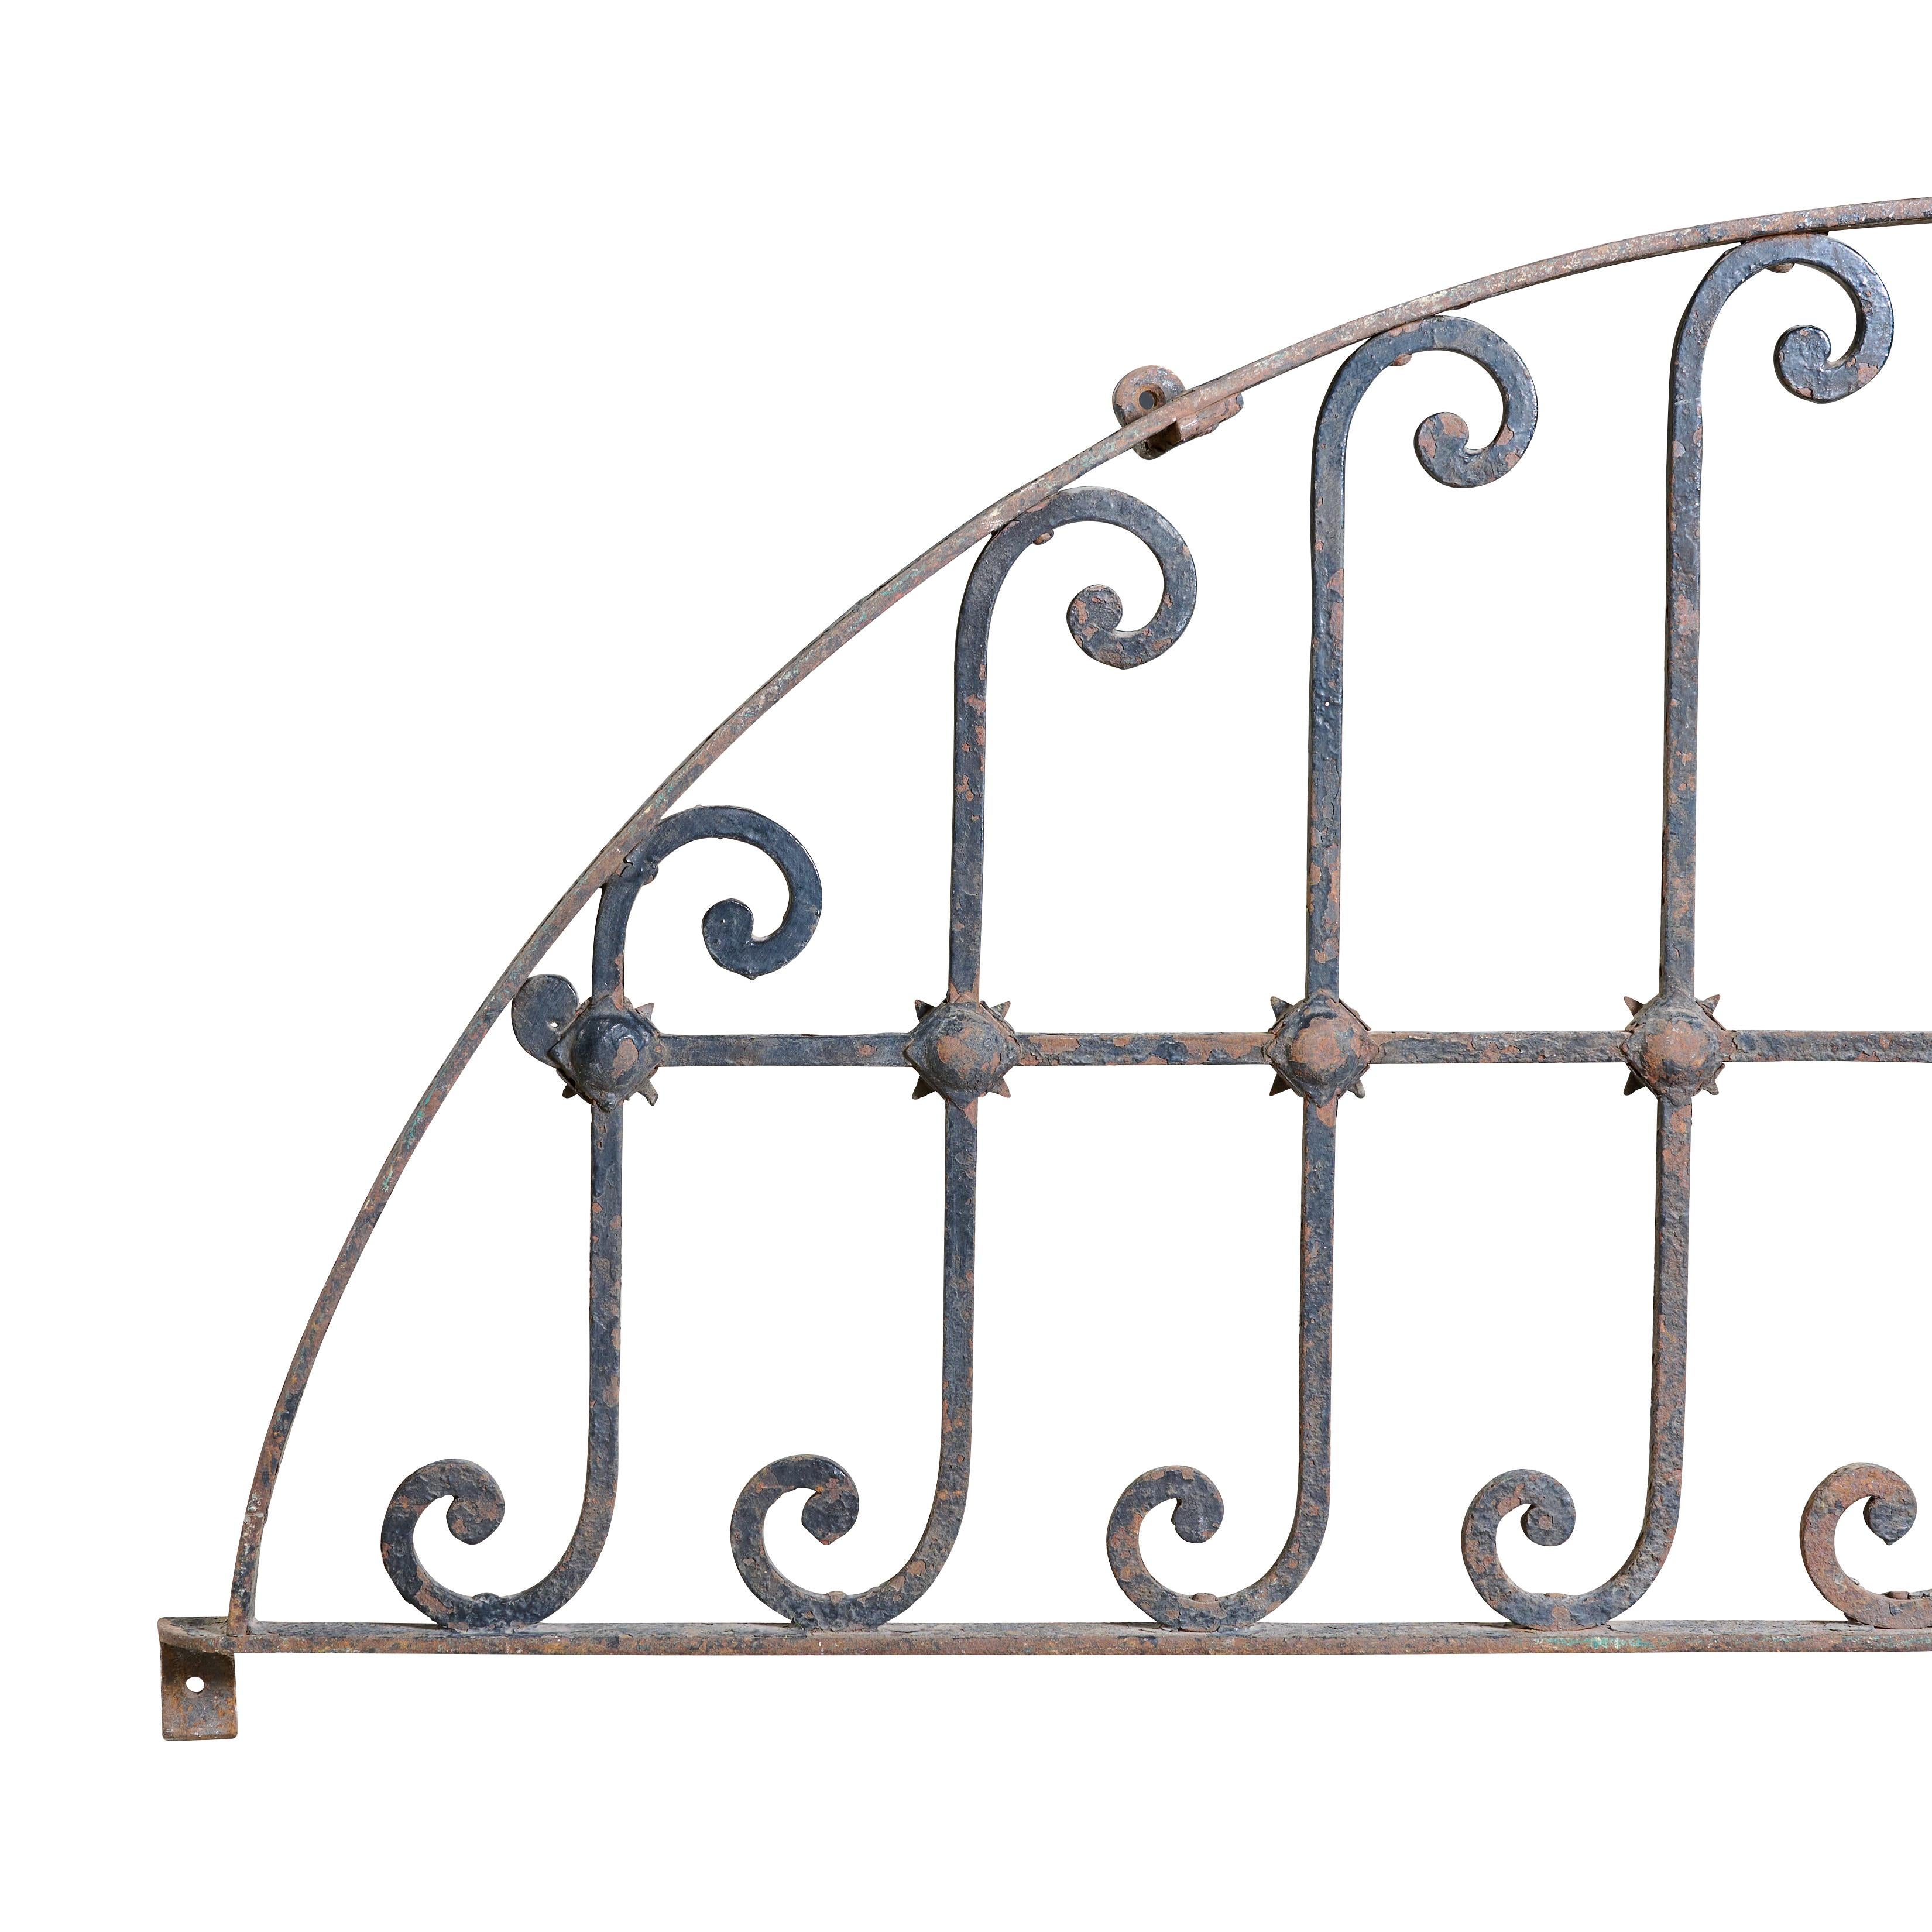 Wrought iron decorative arched grill. With cool design.

